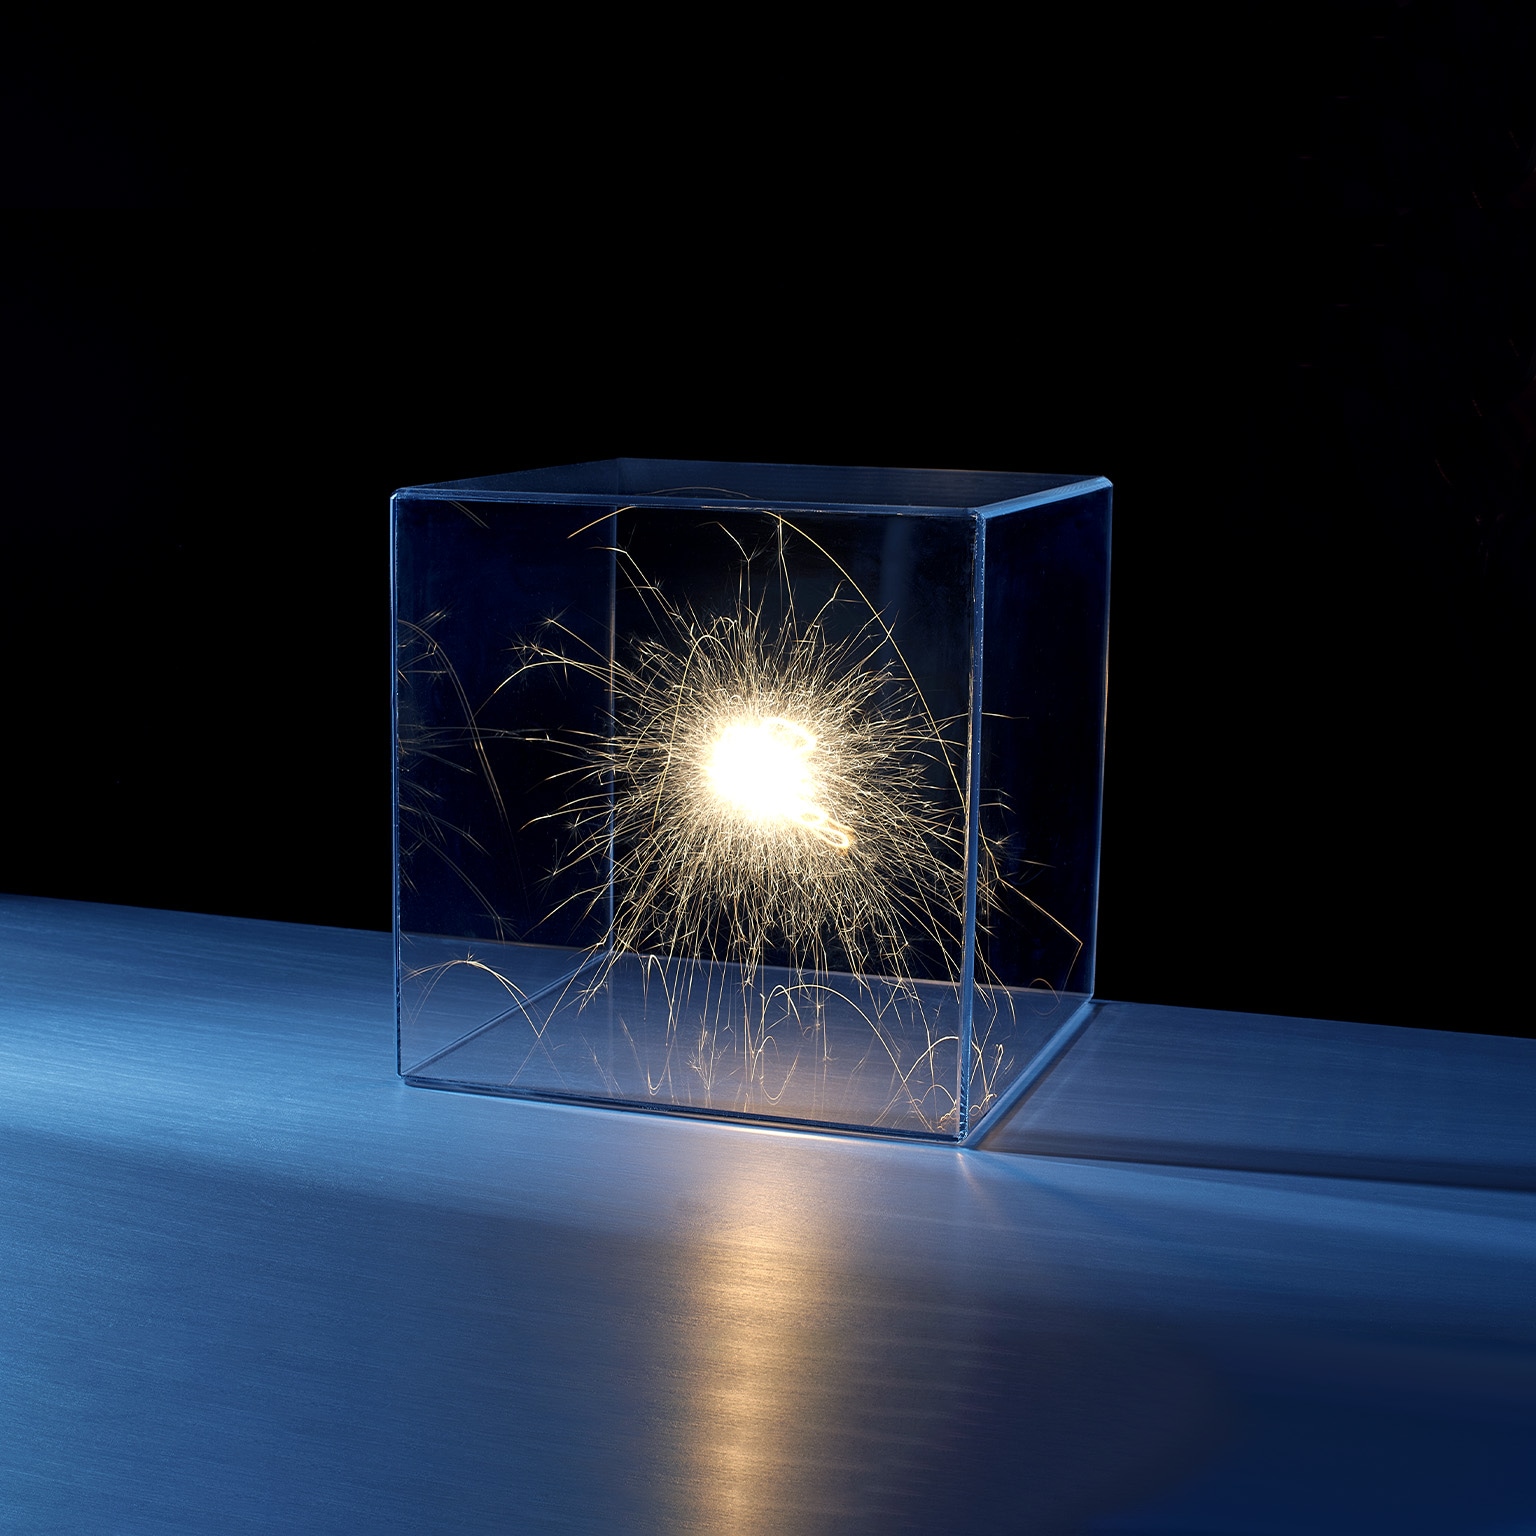  Sparks in a clear box